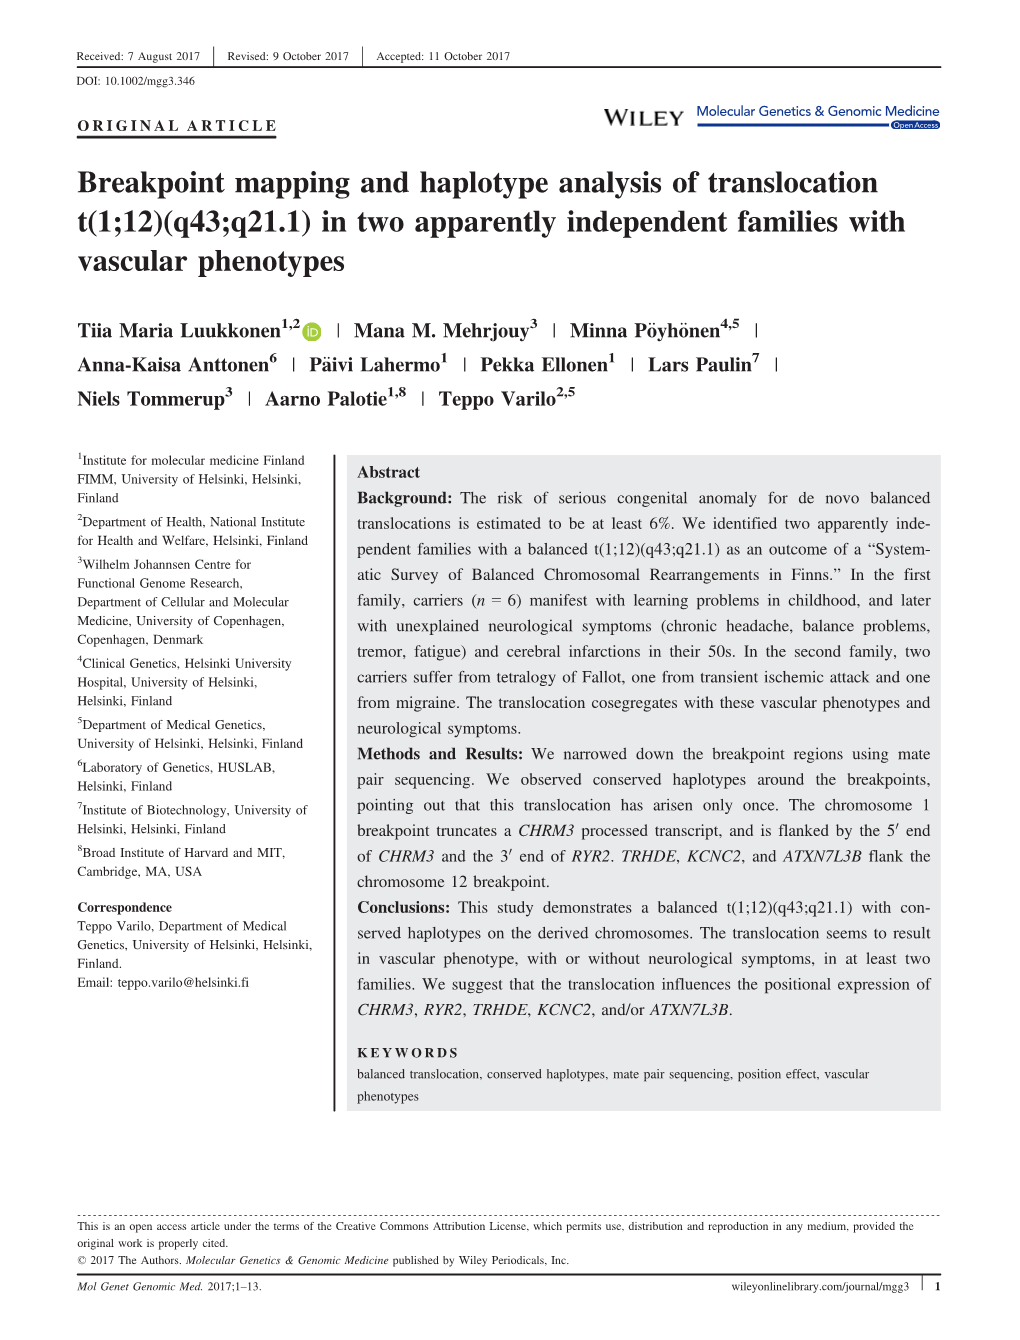 Breakpoint Mapping and Haplotype Analysis of Translocation T(1;12)(Q43;Q21.1) in Two Apparently Independent Families with Vascular Phenotypes